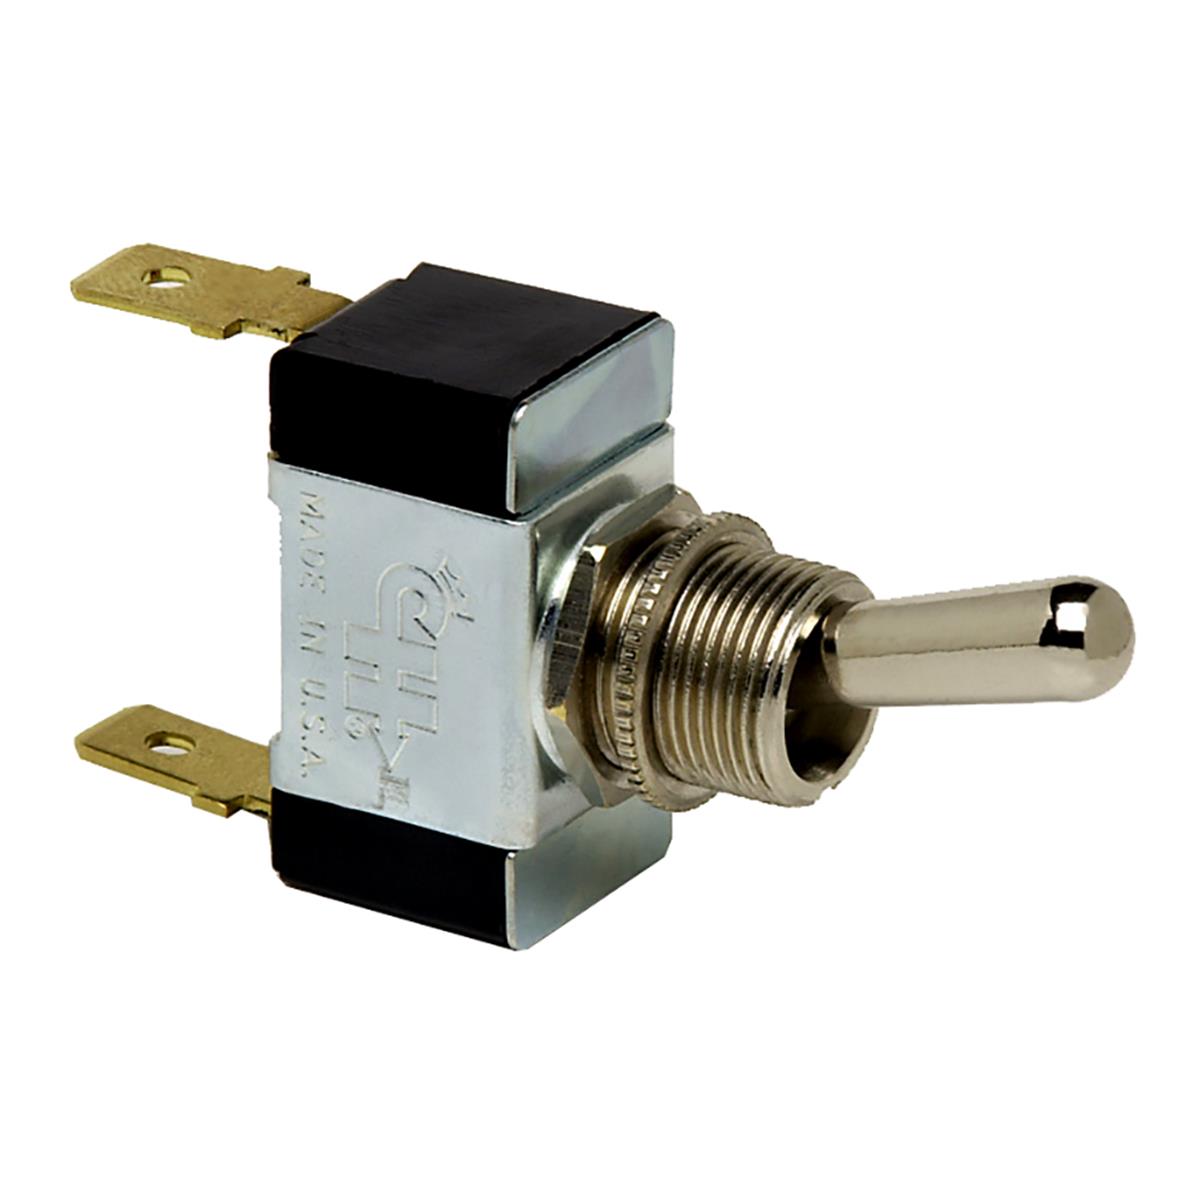 55014-bp On-off Spst 2 Blade Heavy Duty Toggle Switch